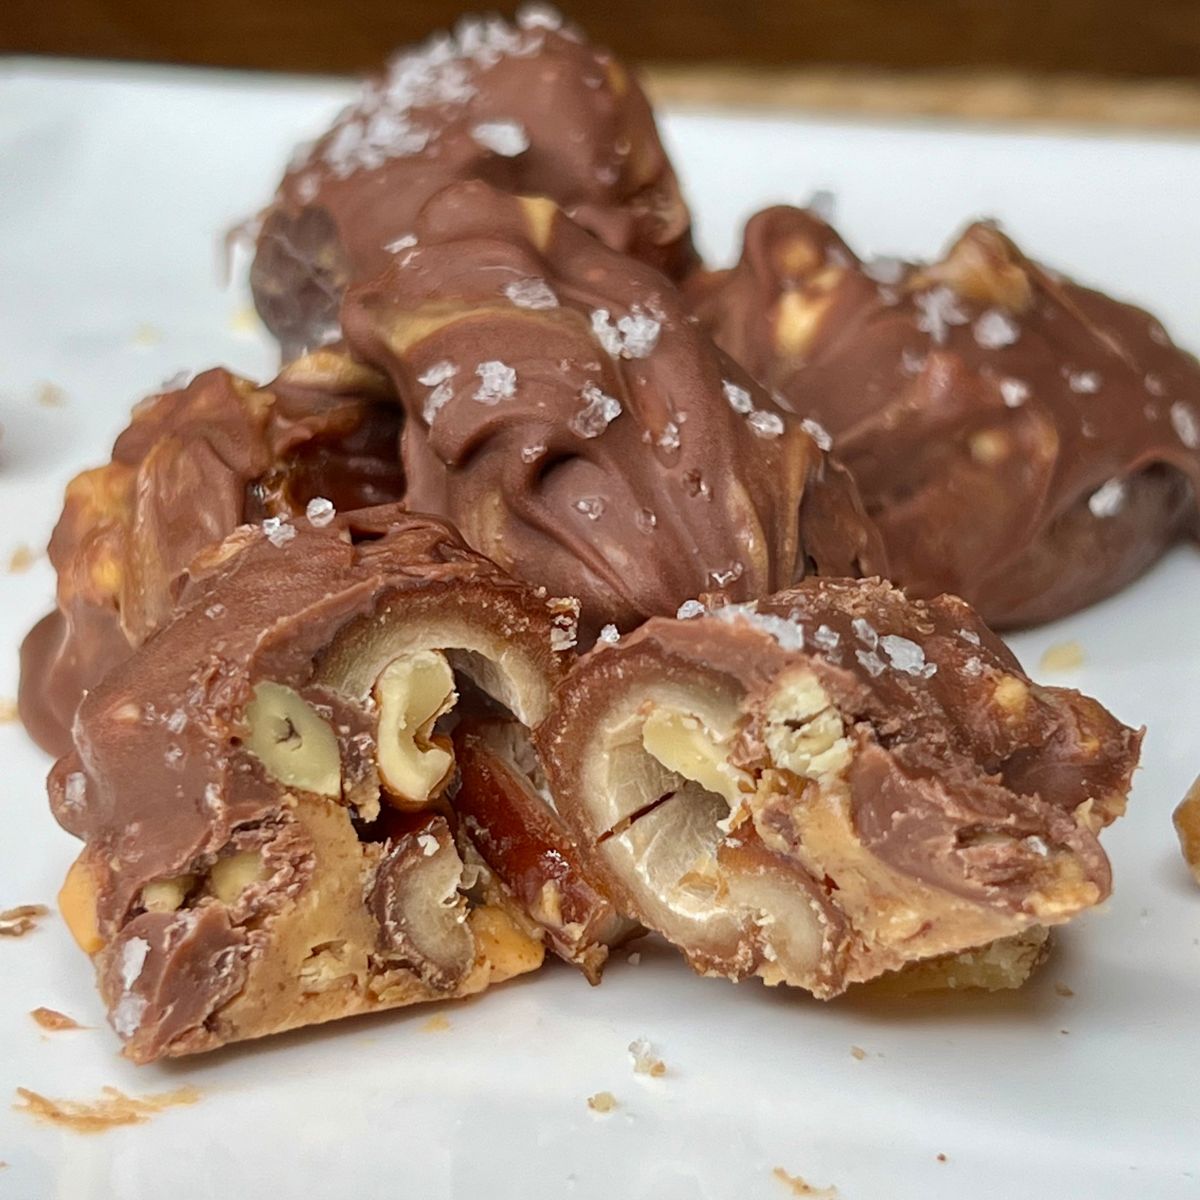 A plate of homemade gluten free snickers bars